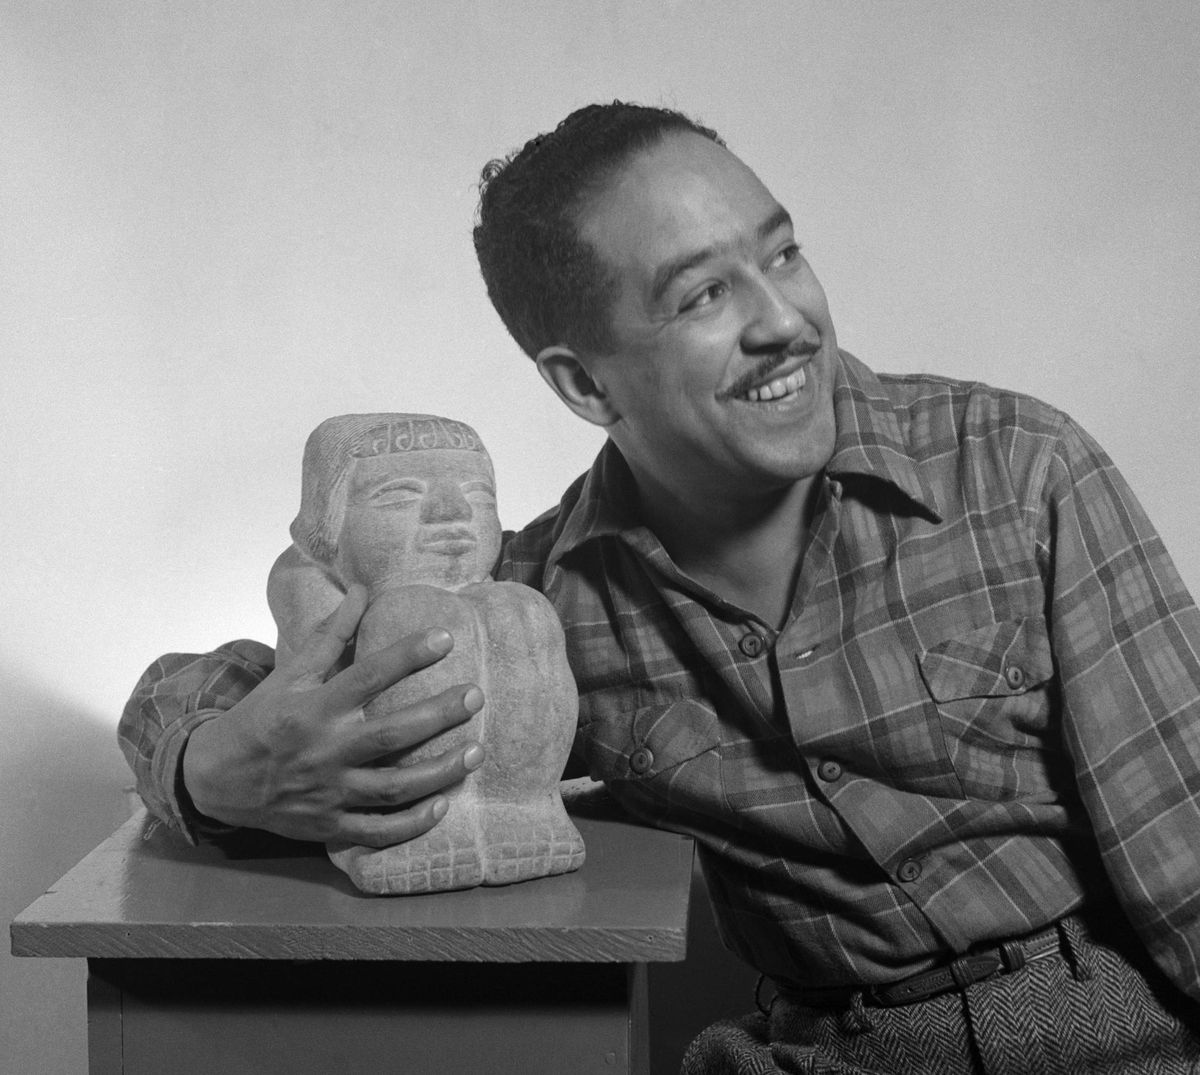 Langston Hughes photographed in 1943 by Gordon Parks Everett Collection Historical / Alamy Stock Photo